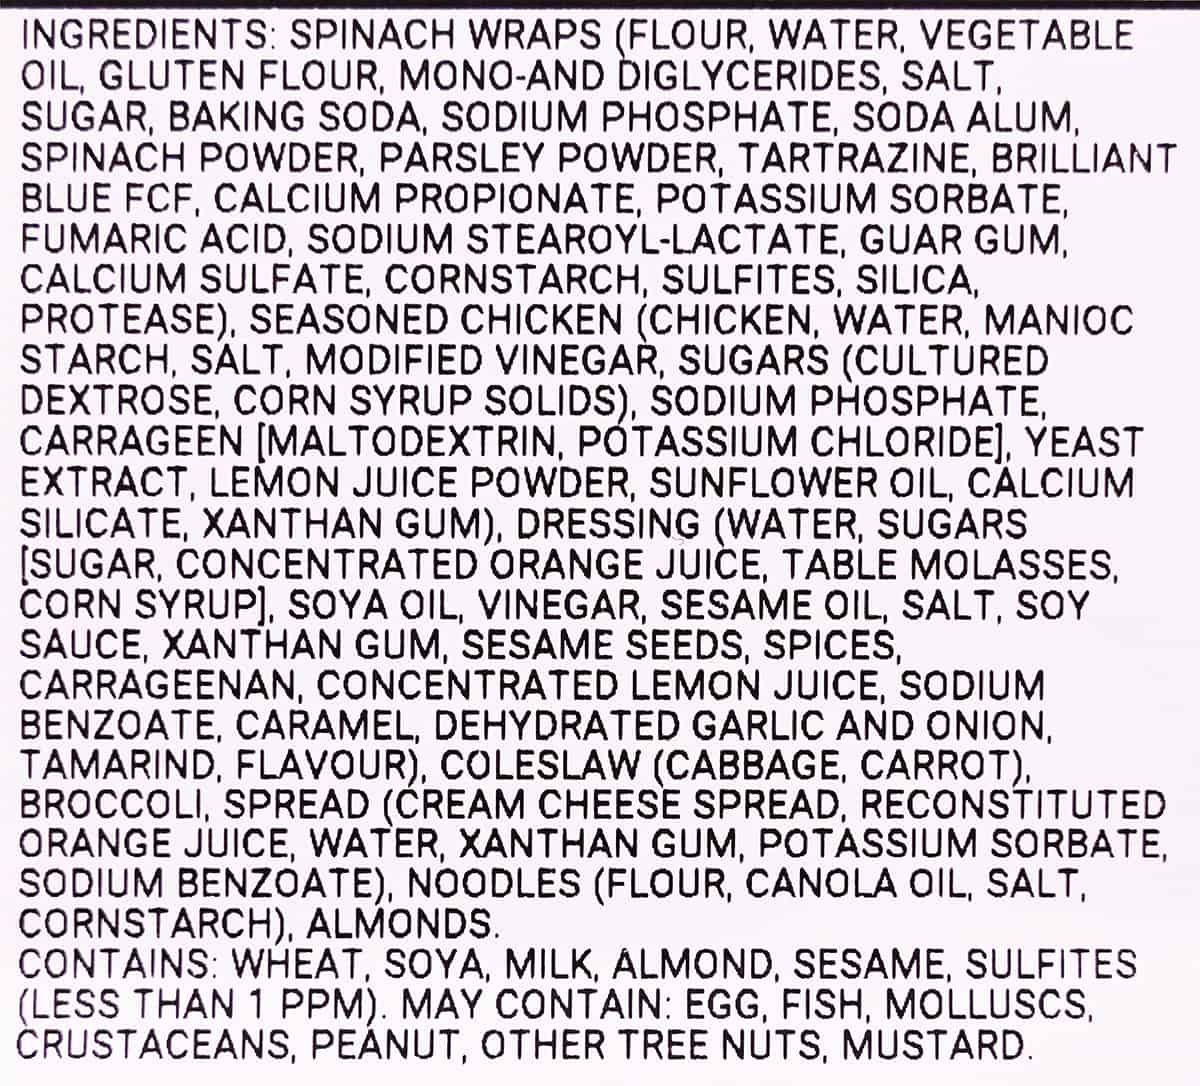 Image of the ingredients label from the Costco Asian Style Wraps.